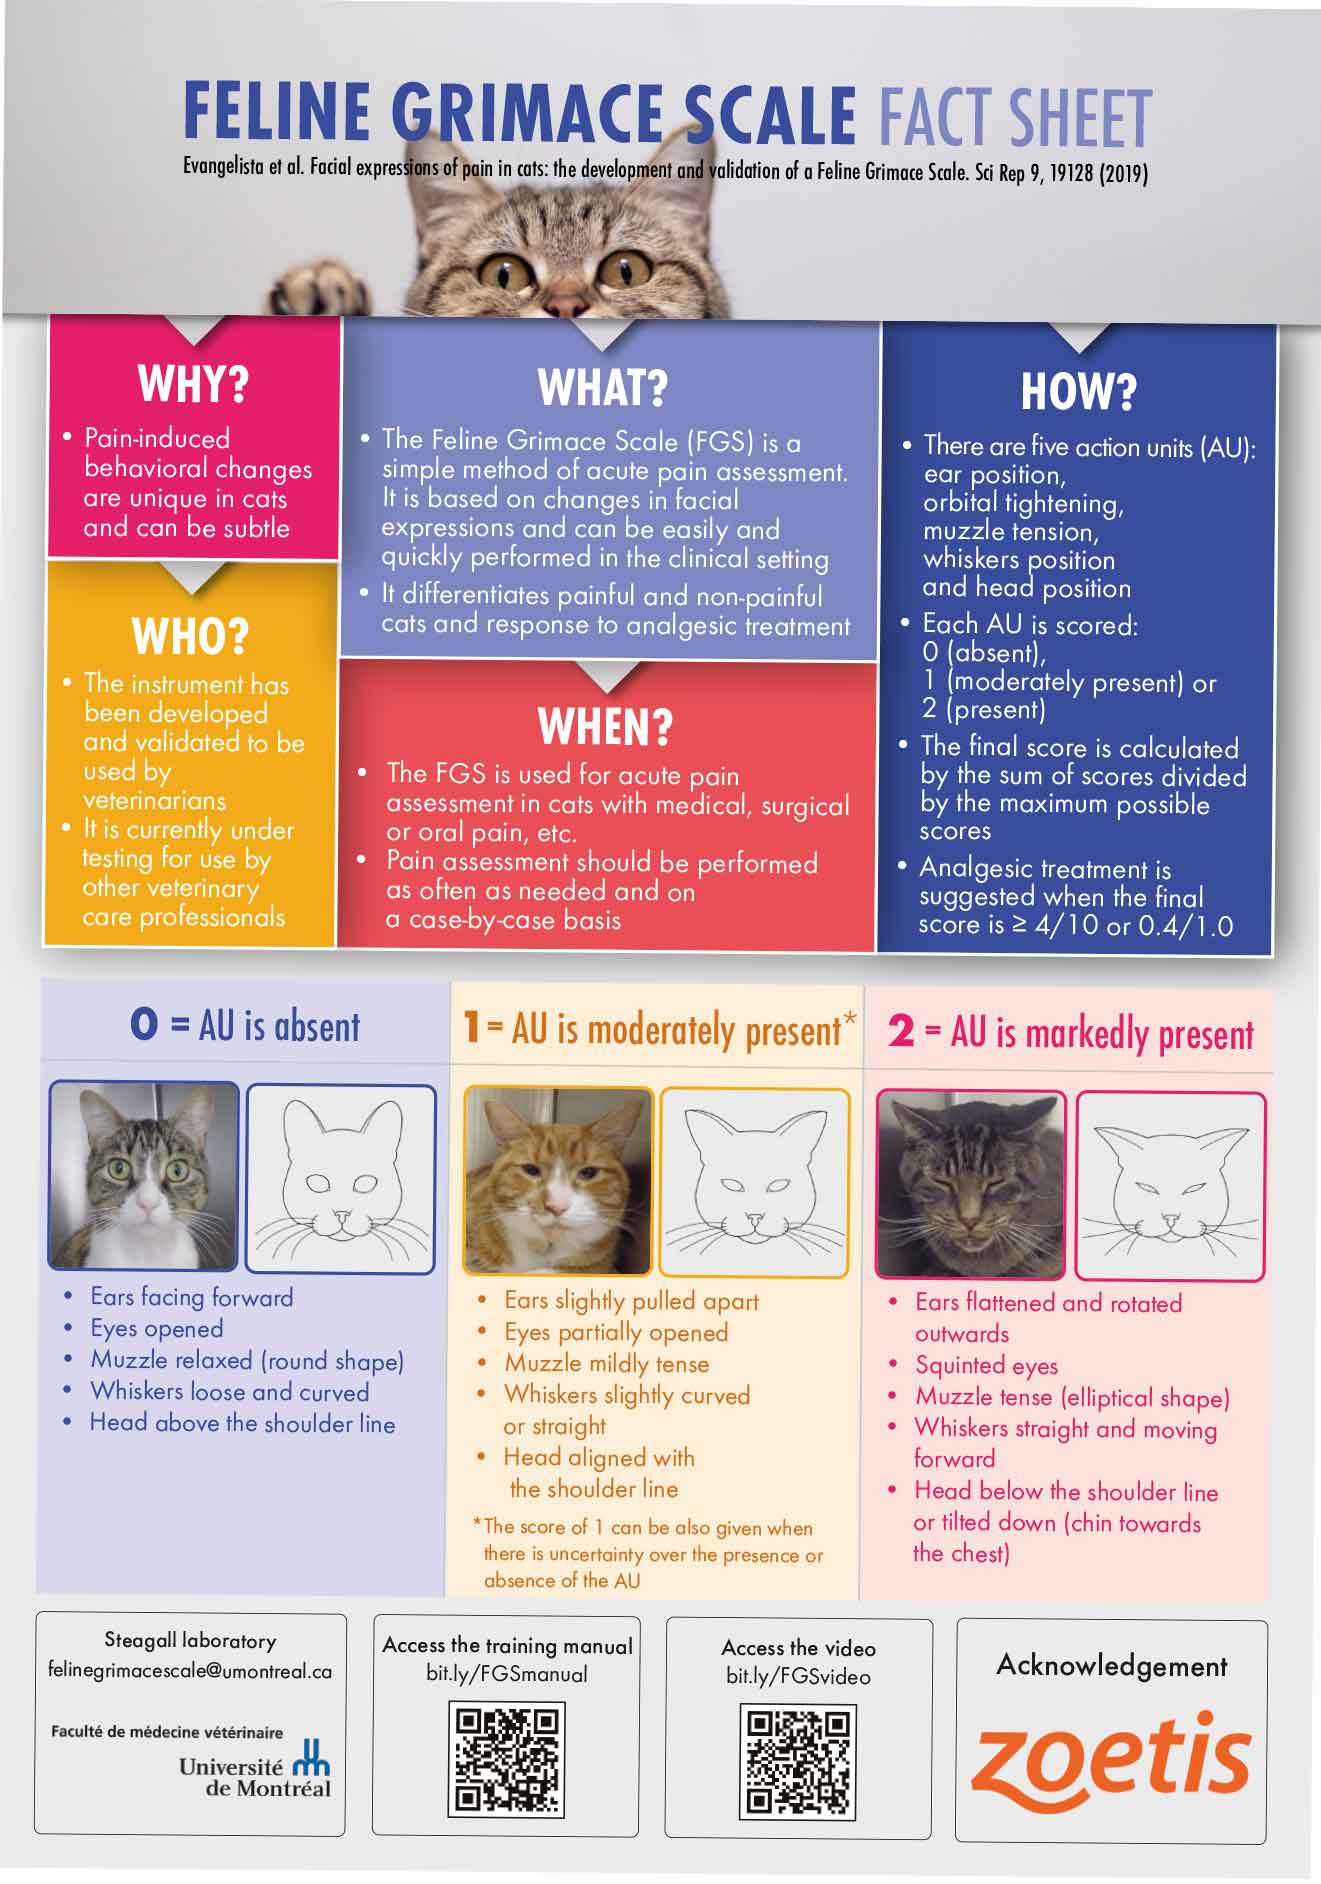 Figure 1. The Feline Grimace Scale fact sheet. To download a copy, visit https://bit.ly/3fWakGv